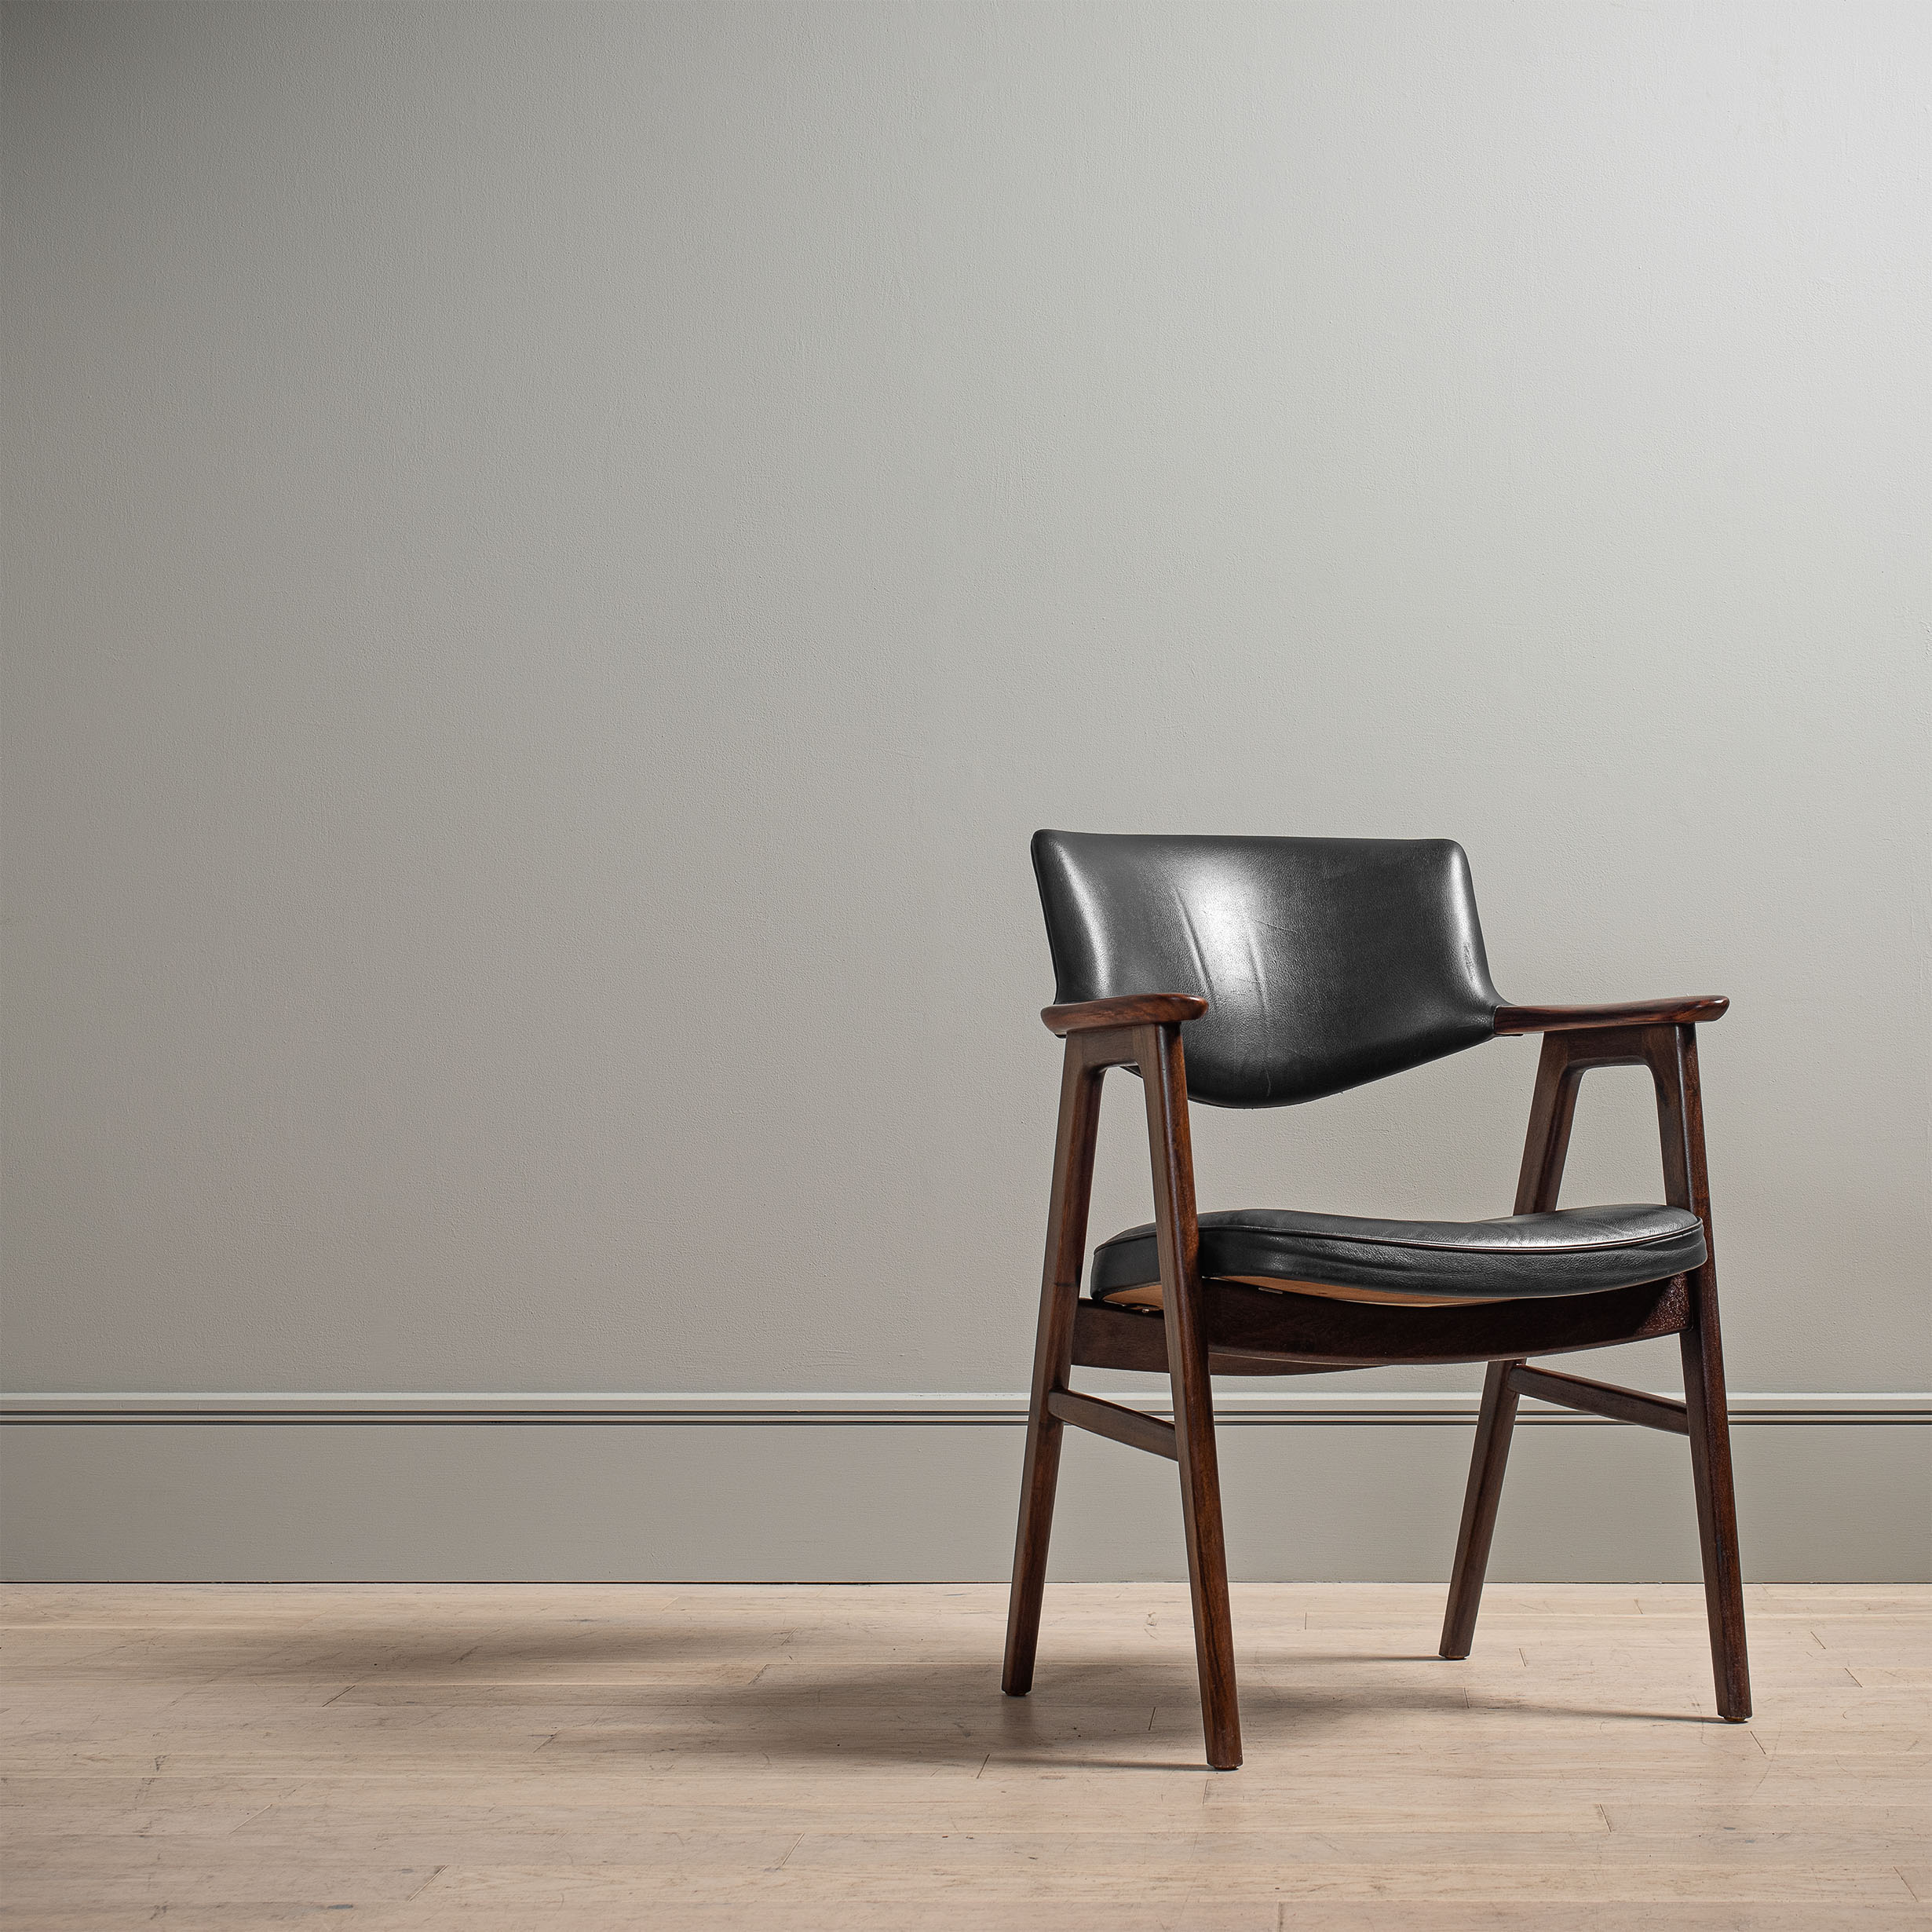 The Erik Kirkegaard chair is probably the most comfortable chair of its kind that we’ve encountered over the years. The curves and angles hold and support the body extremely well. Excellent for extended hours at the desk or reading etc. The chairs